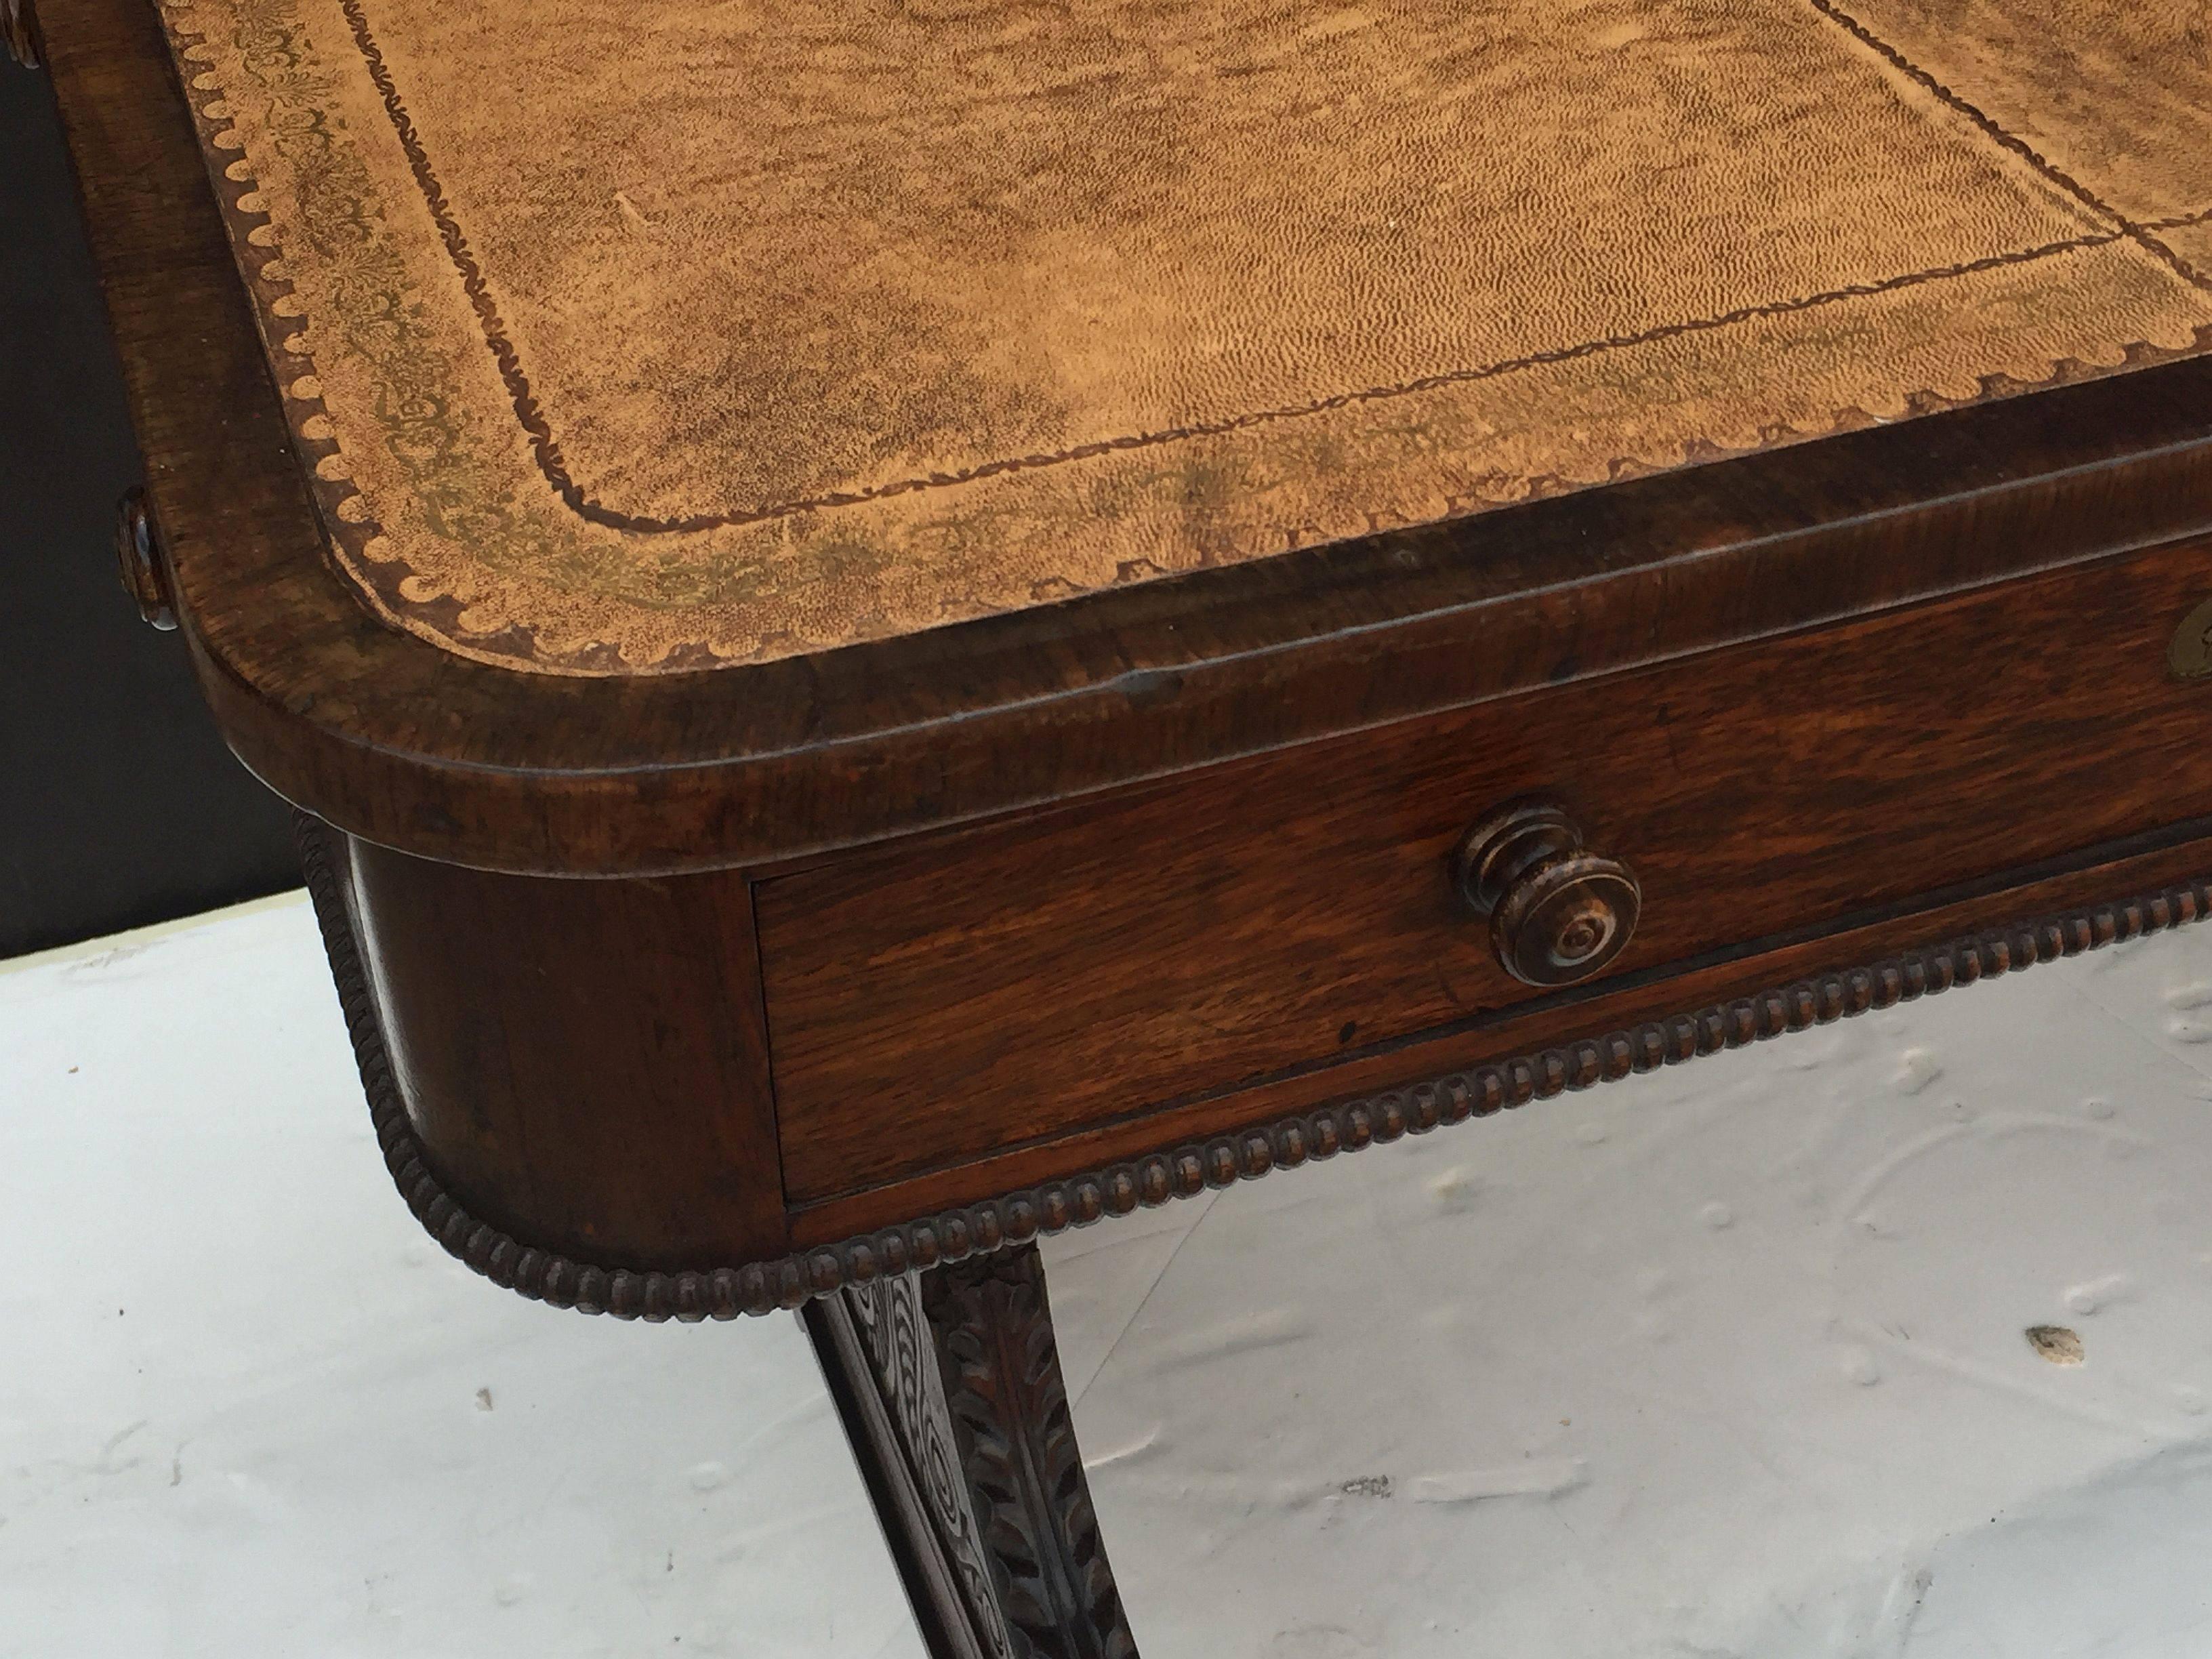 Wood Scottish Library Table or Writing Desk with Leather Top from the Regency Era